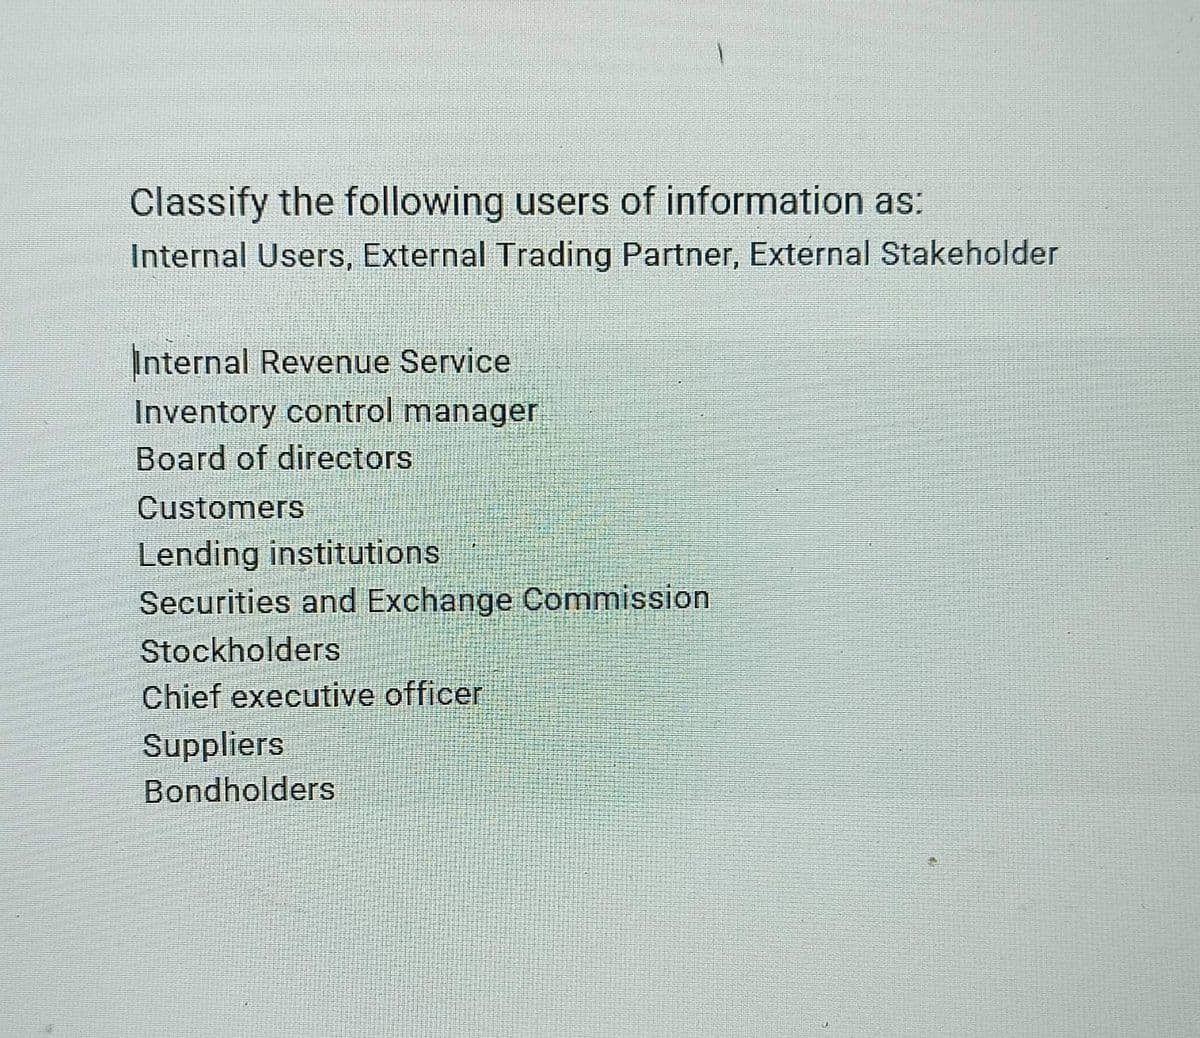 Classify the following users of information as:
Internal Users, External Trading Partner, External Stakeholder
Internal Revenue Service
Inventory control manager
Board of directors
Customers
Lending institutions
Securities and Exchange Commission
Stockholders
Chief executive officer
Suppliers
Bondholders
